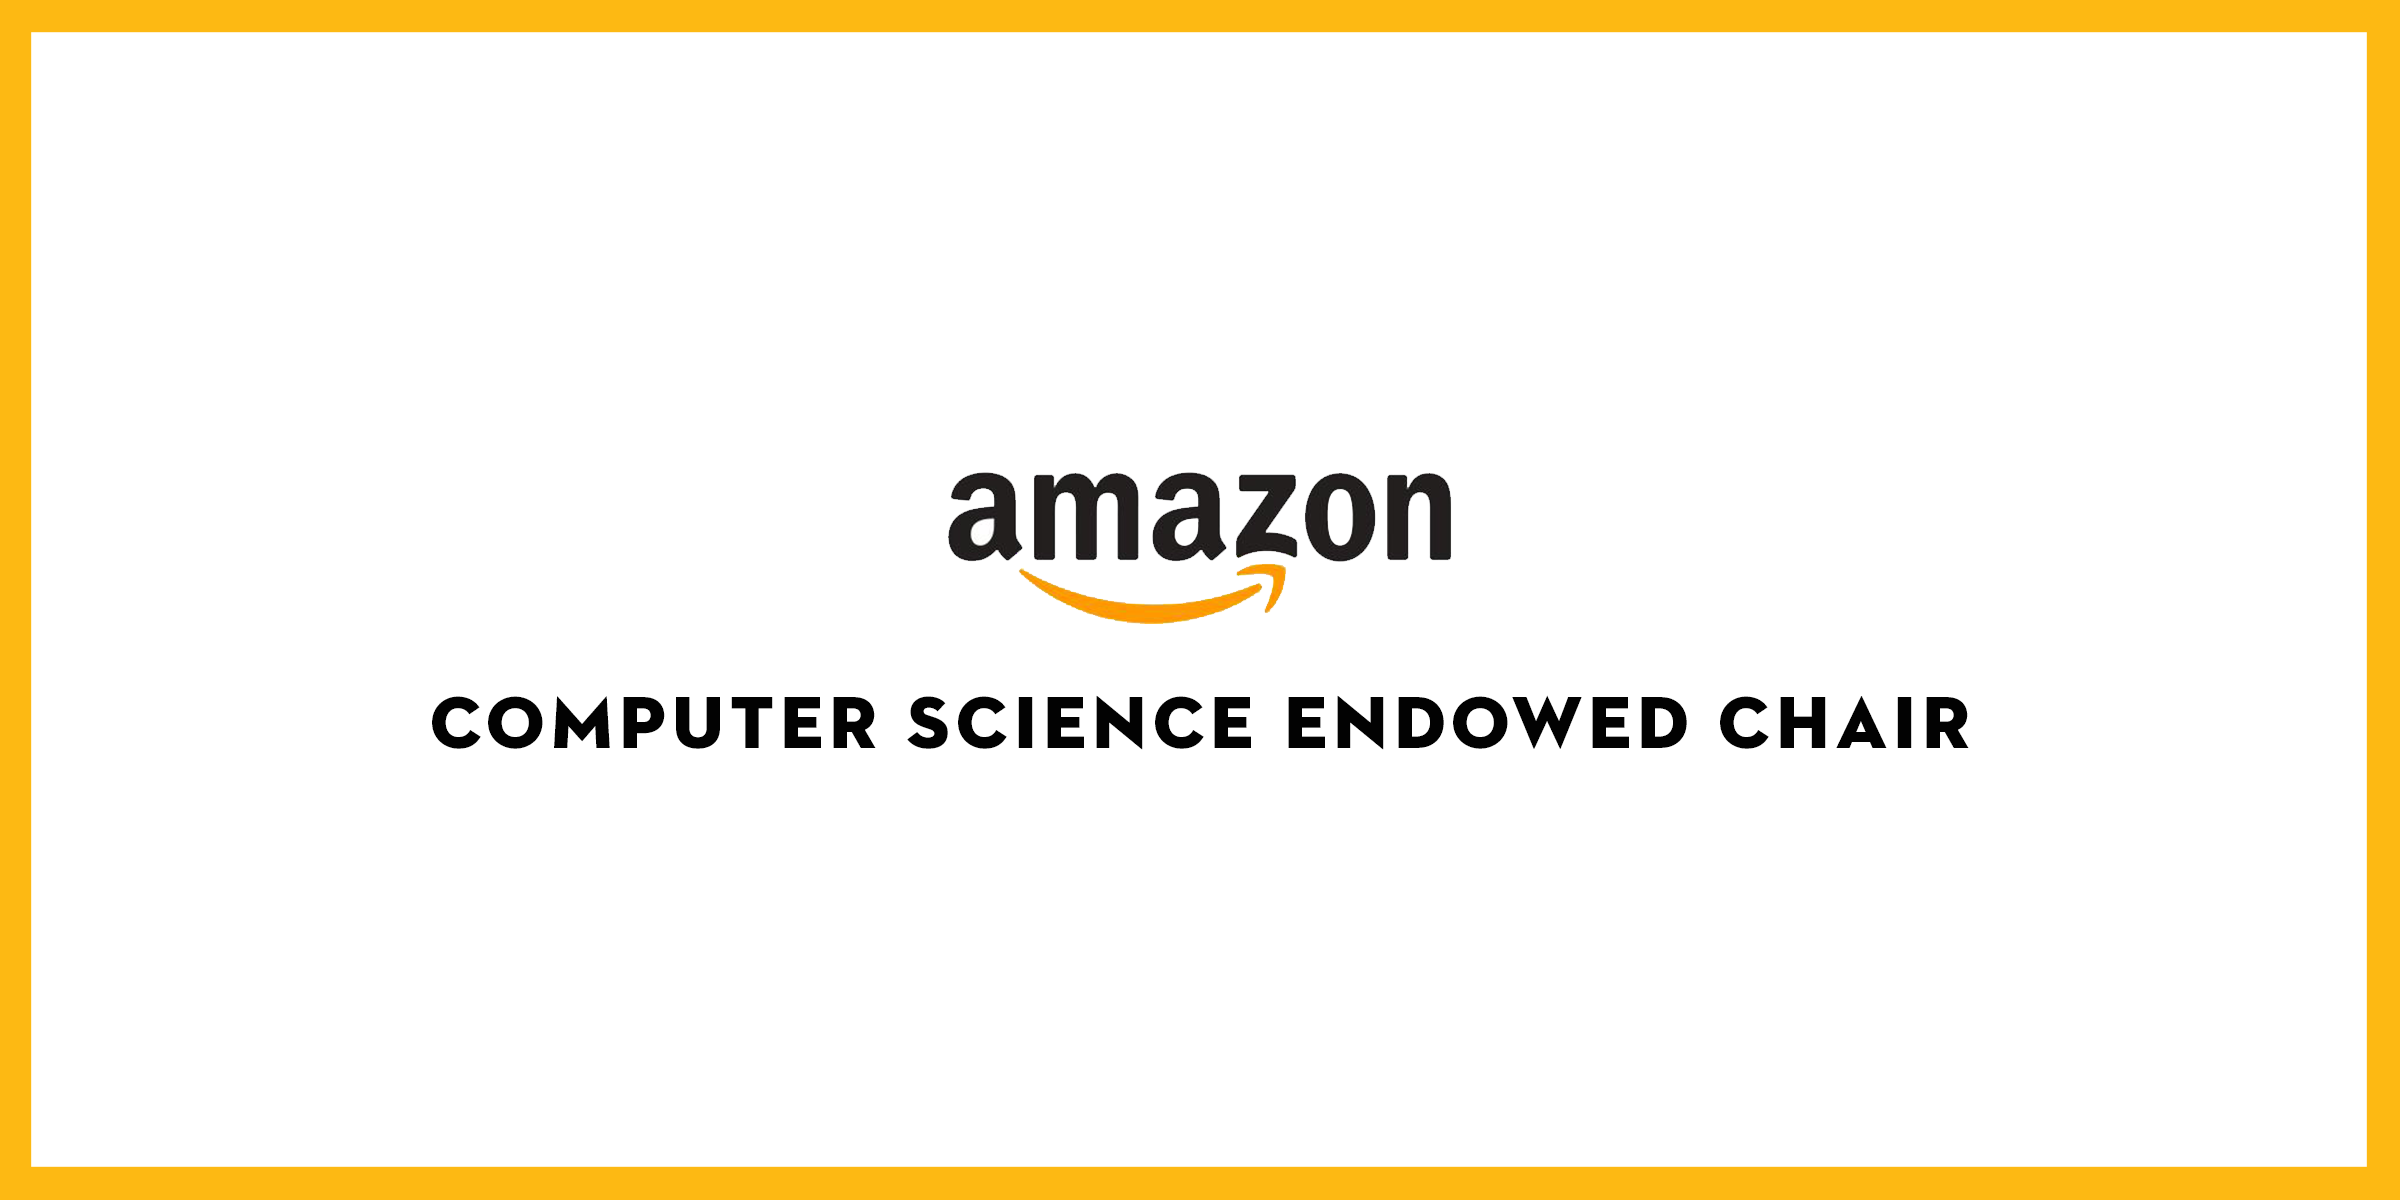 Amazon Endowed Computer Science Chair